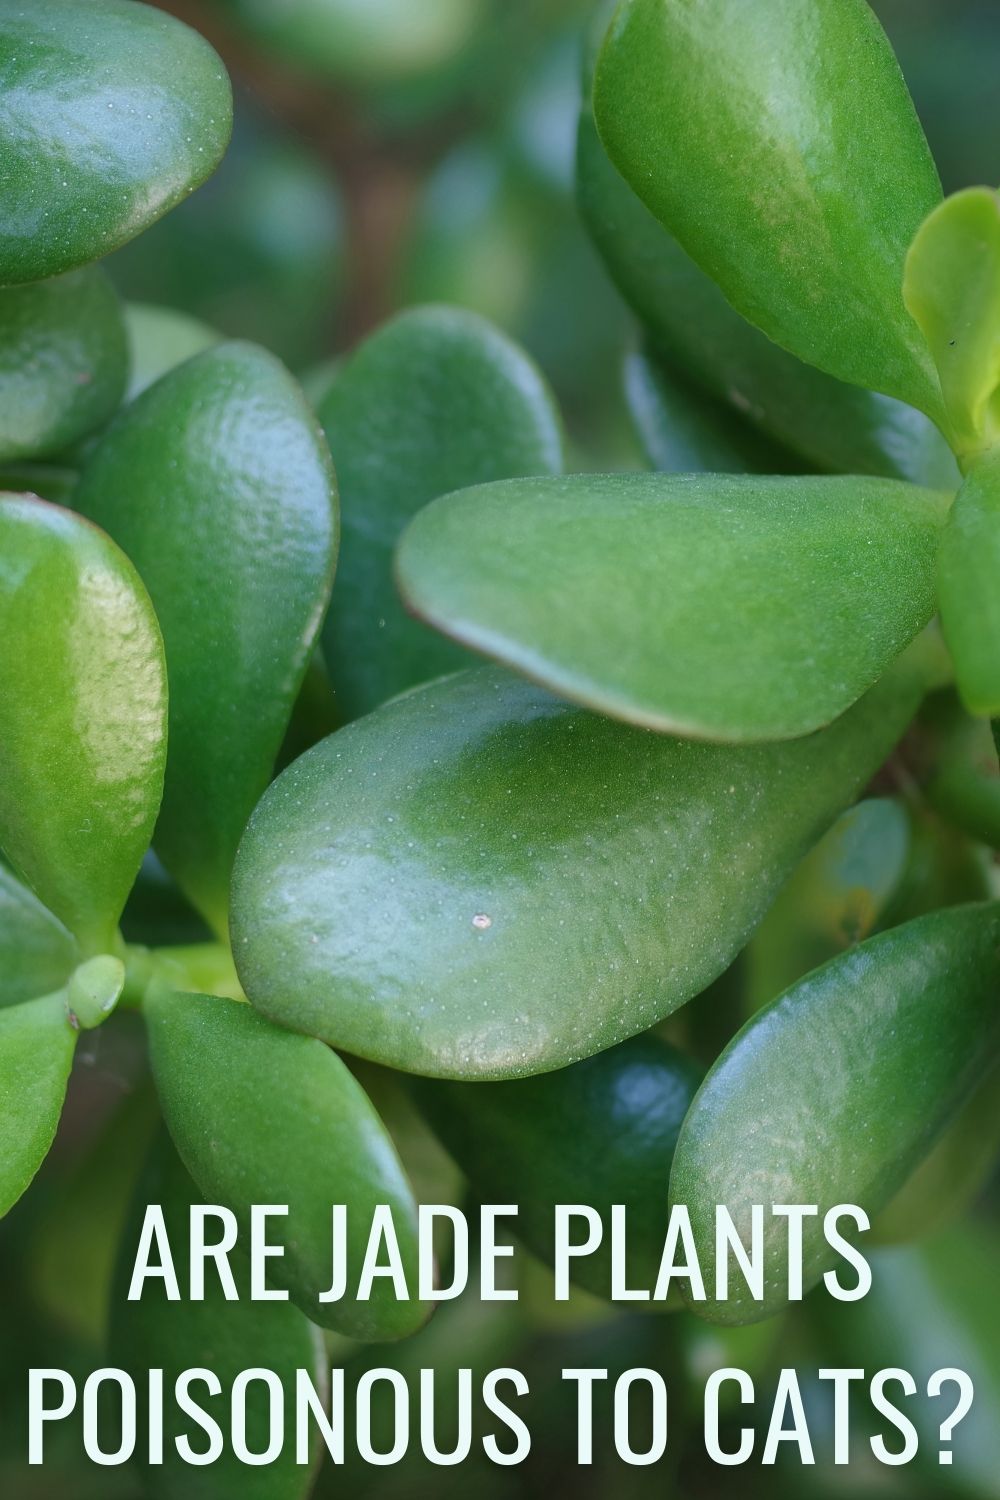 Are jade plants poisonous to cats?